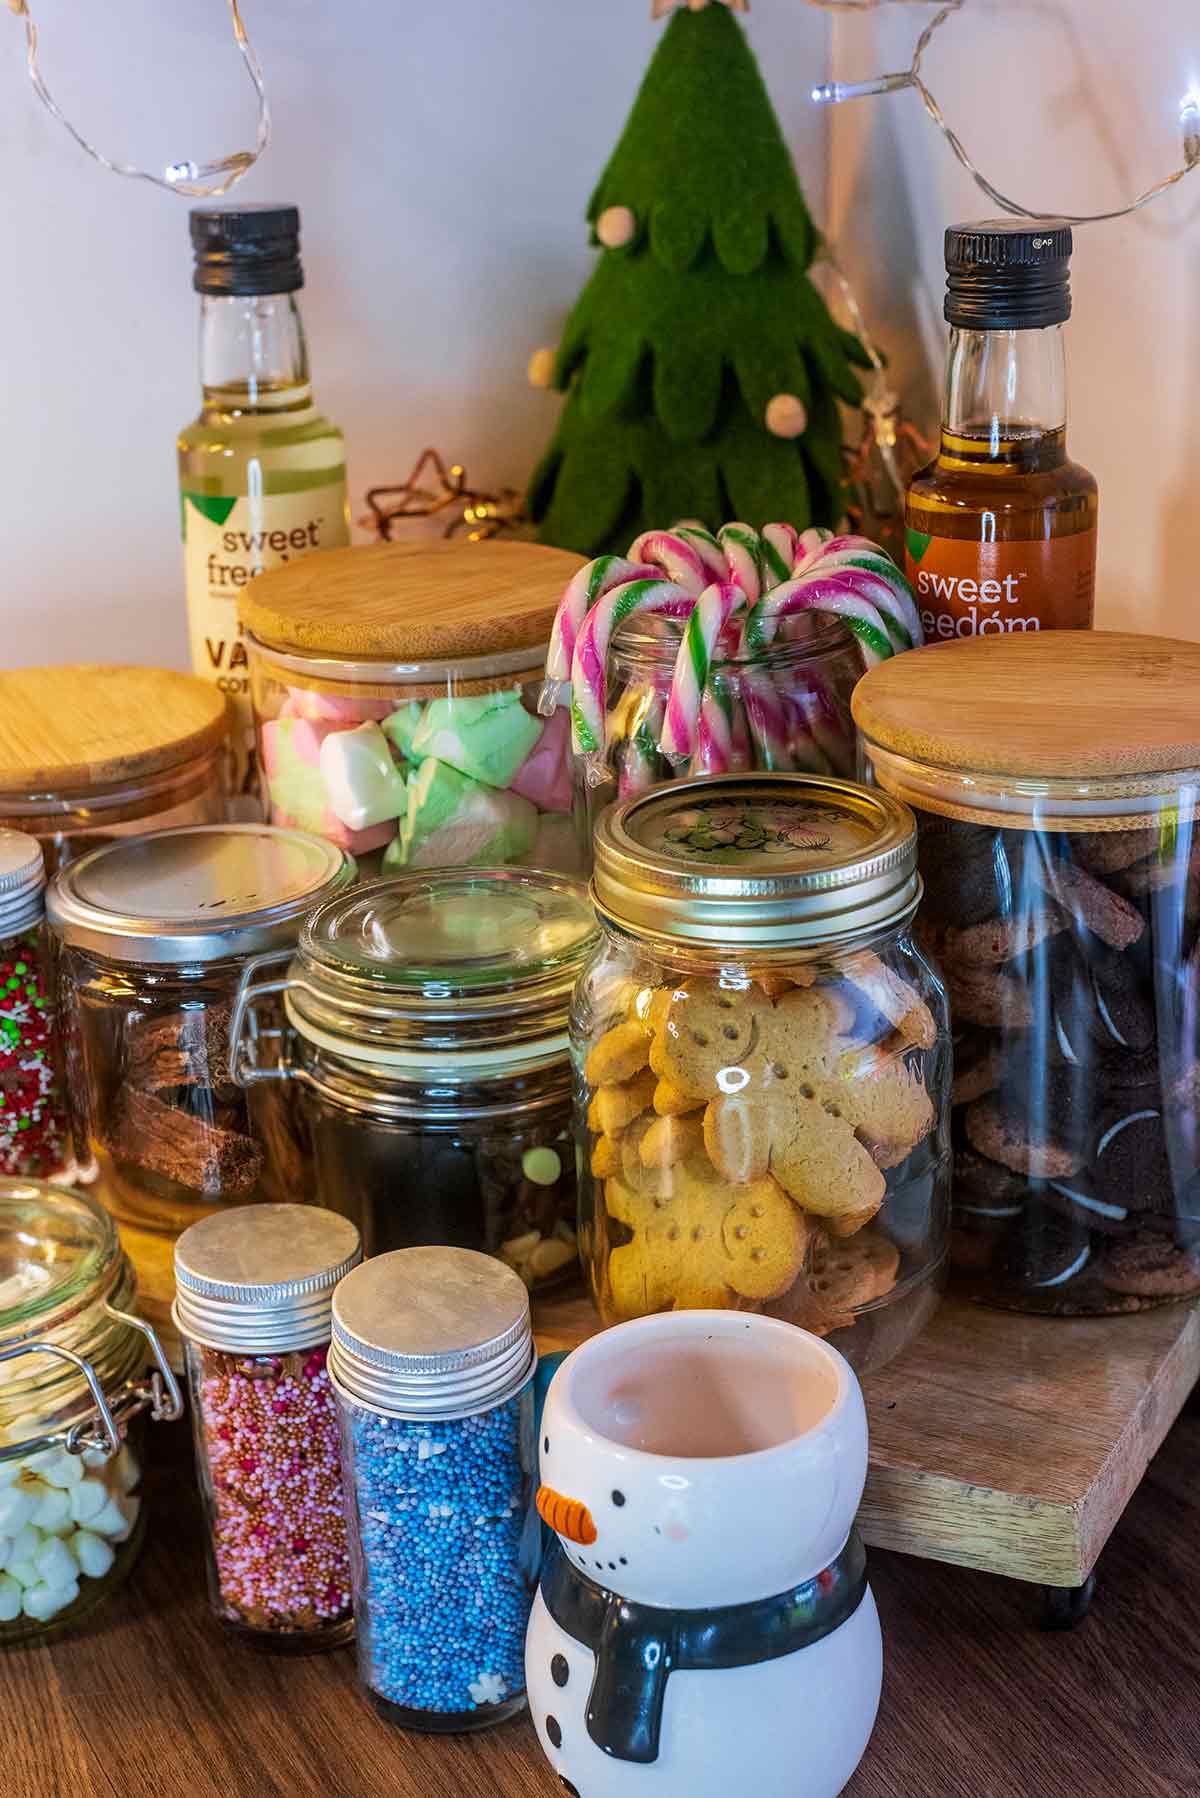 A snowman shaped mug in front of a jar of gingerbread men and jars of sugar sprinkles.